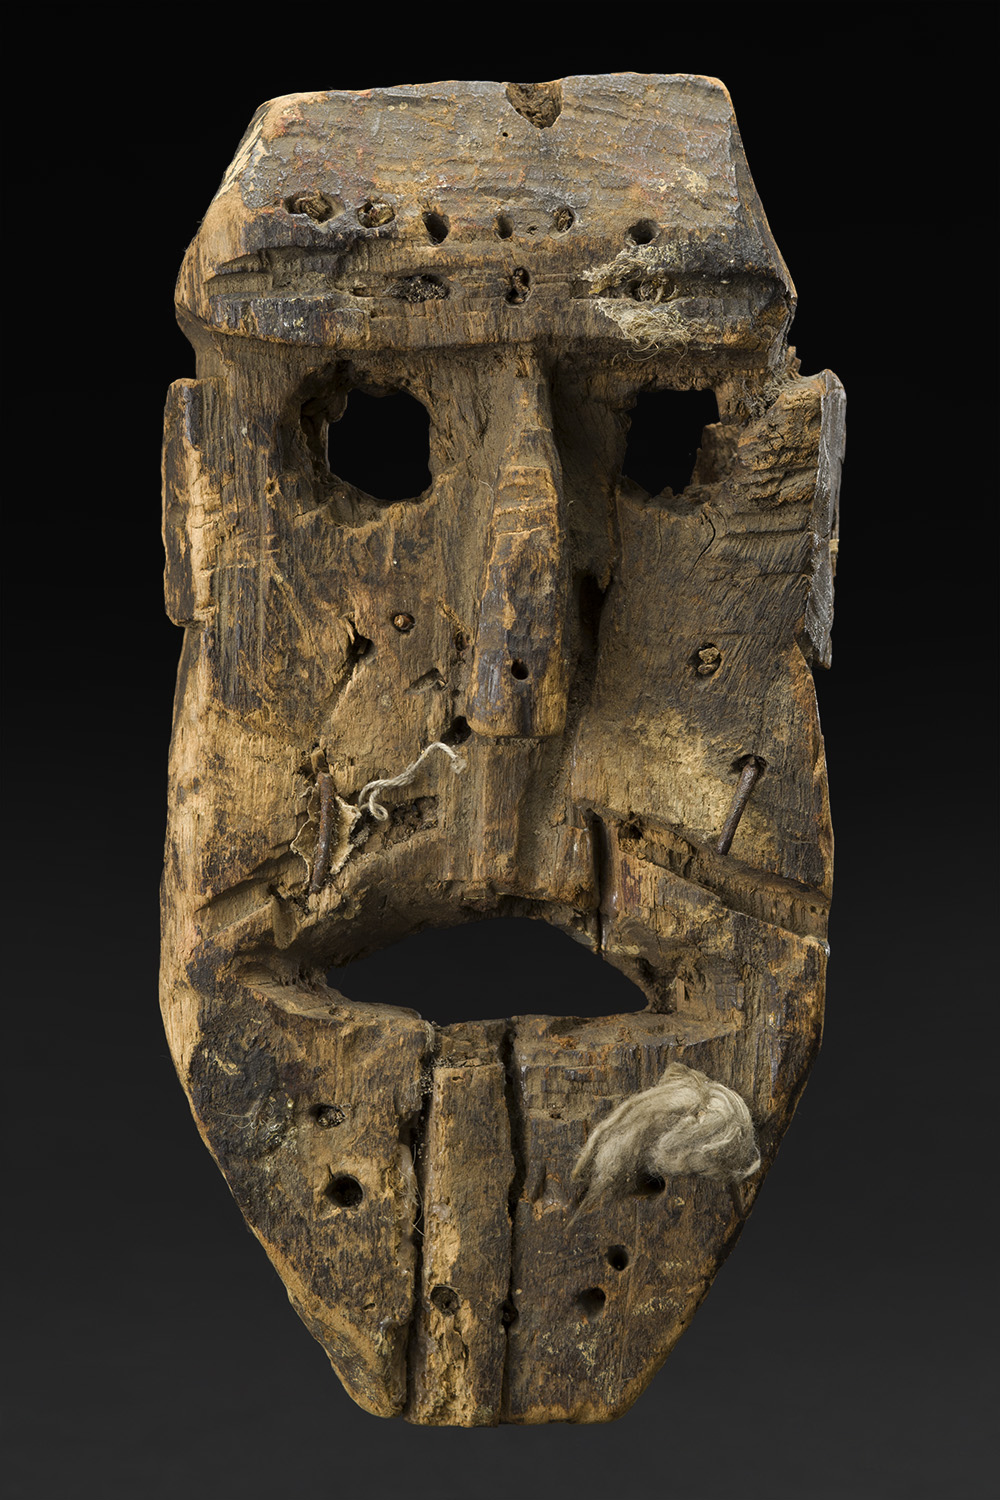   Masks    Nepal  , Late 19th or early 20th C. Wood 10 x 5.5 x 3 inches 25.4 x 14 x 7.6 cm M 222s 